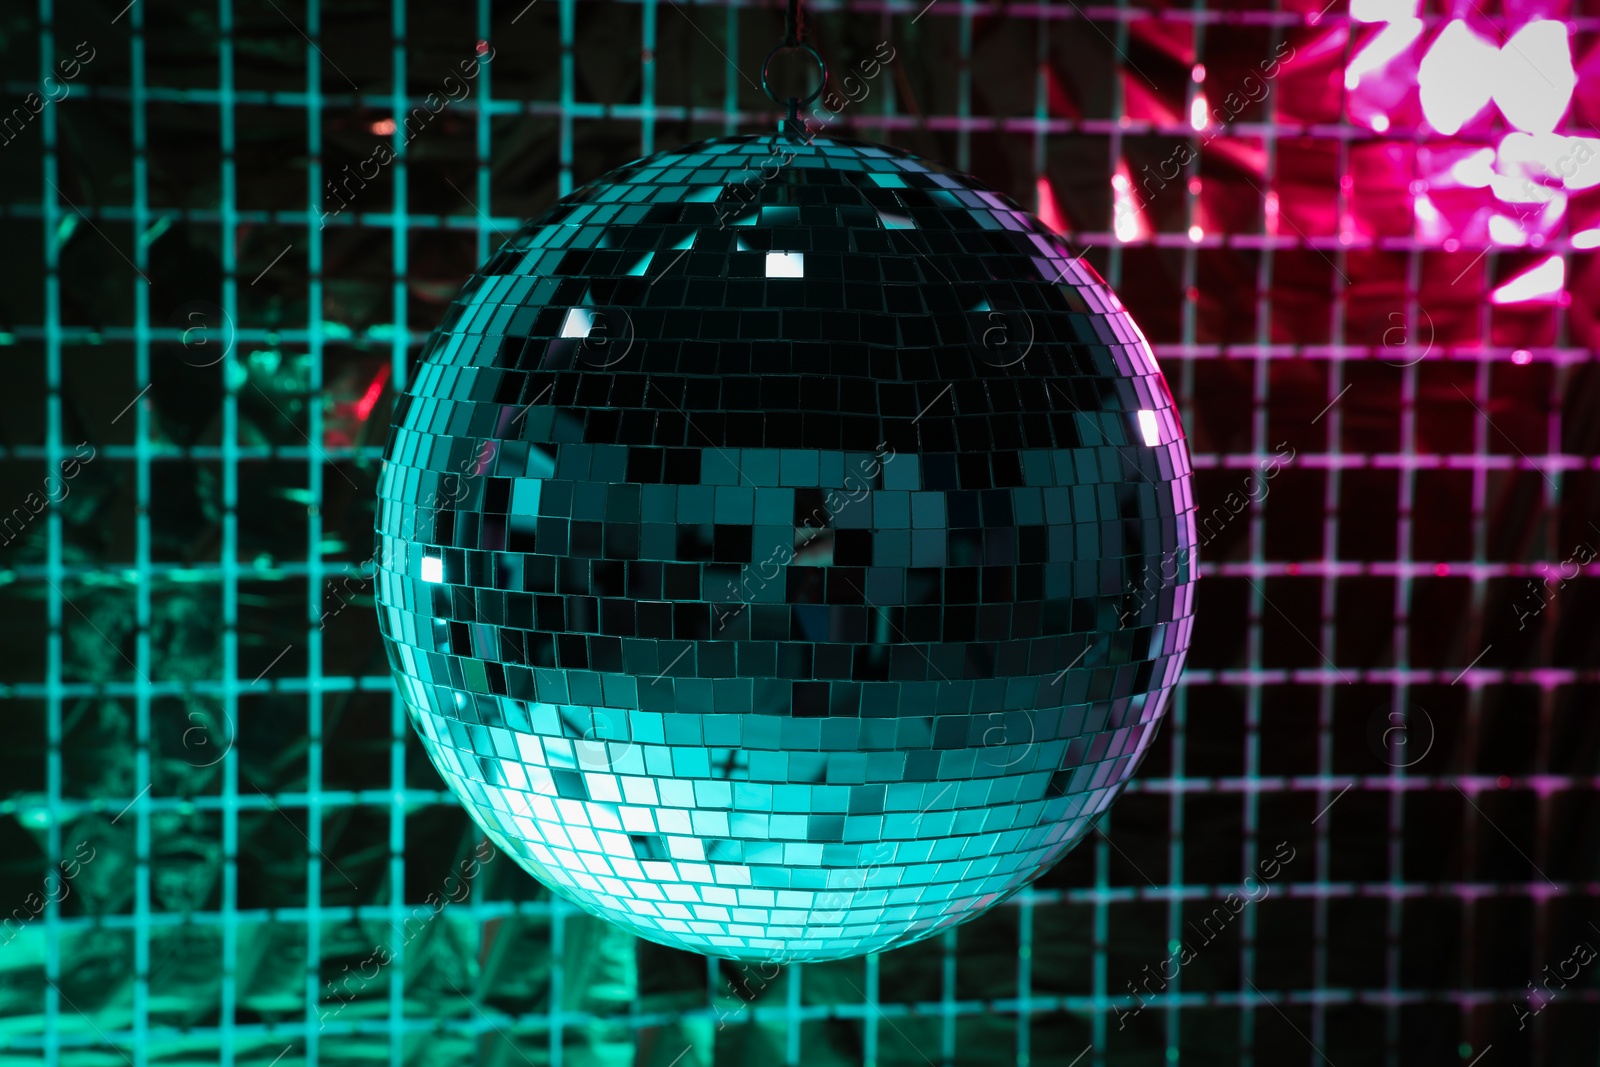 Photo of Shiny disco ball against foil party curtain under turquoise and pink light